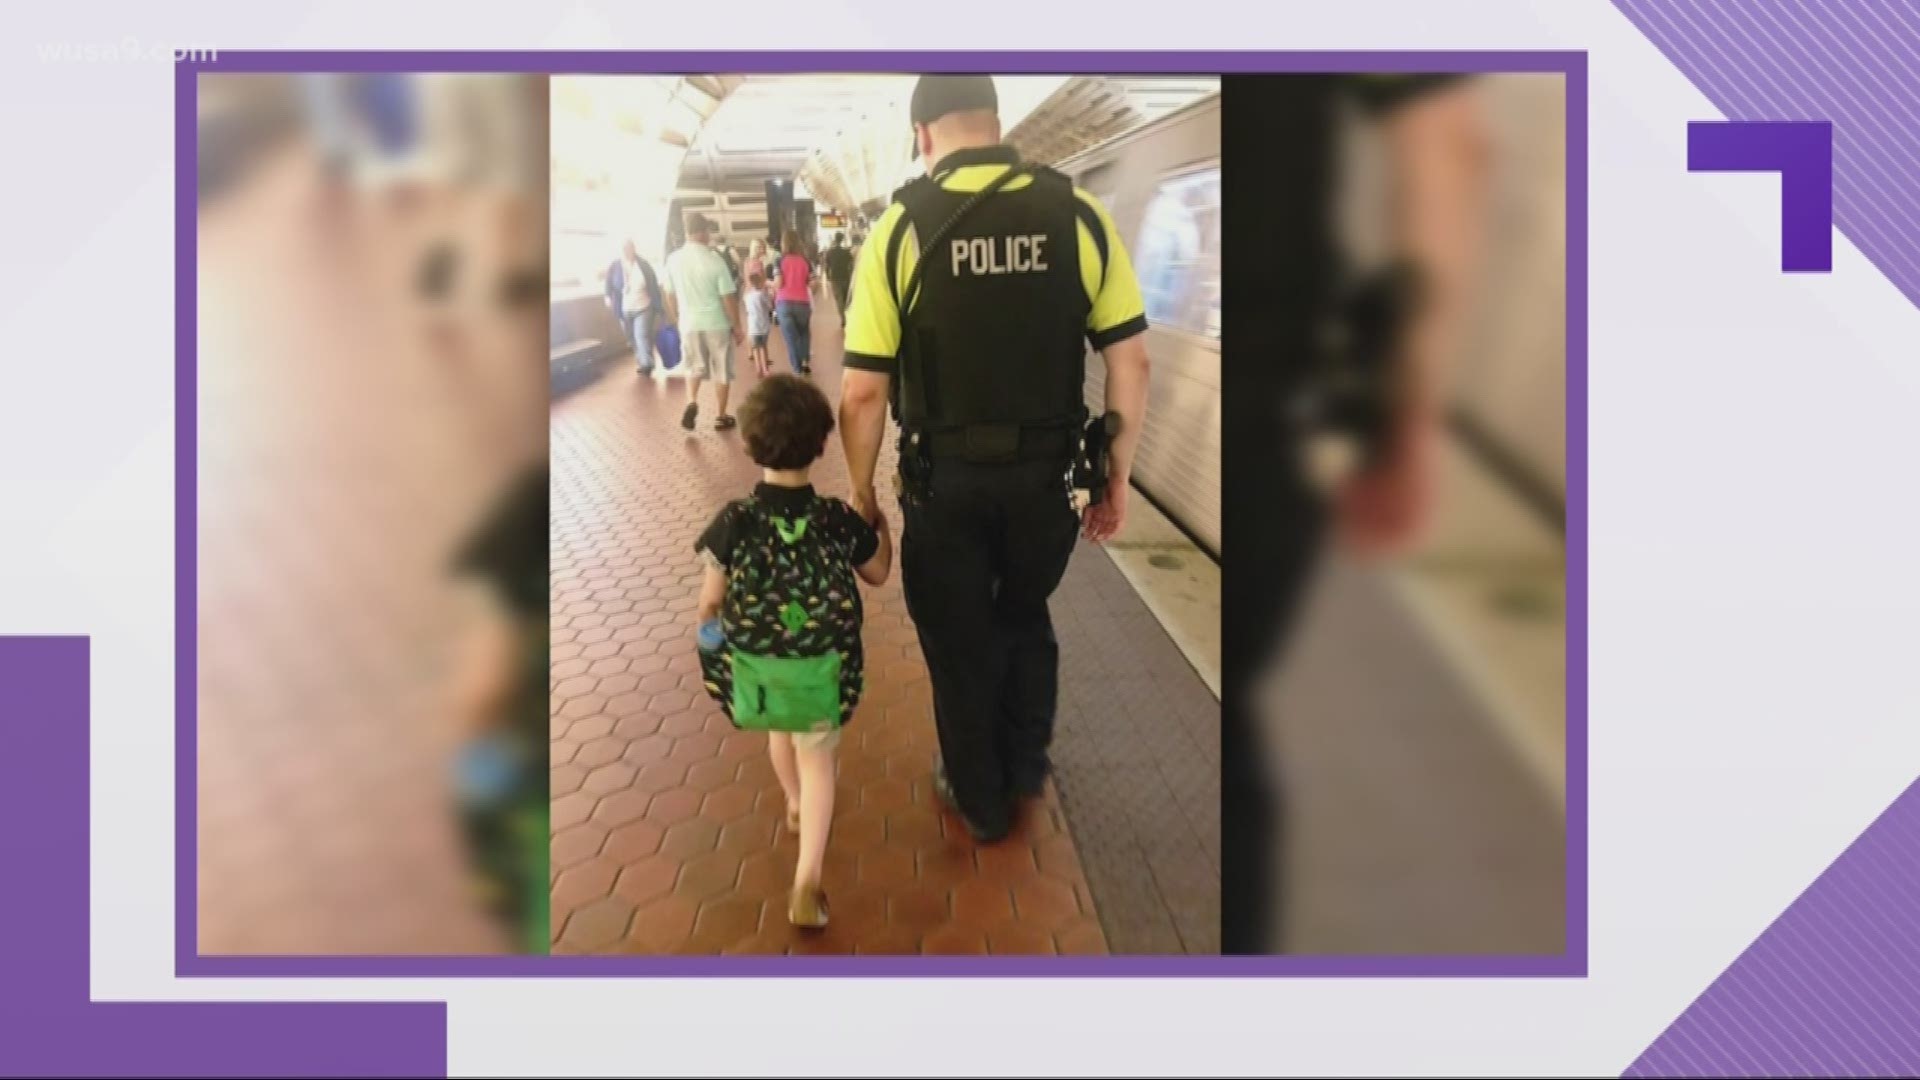 The officer not only watched Andrew's videos and posed for Instagram filters, but he also held Andrew's hand and rode the entire train ride home with him.